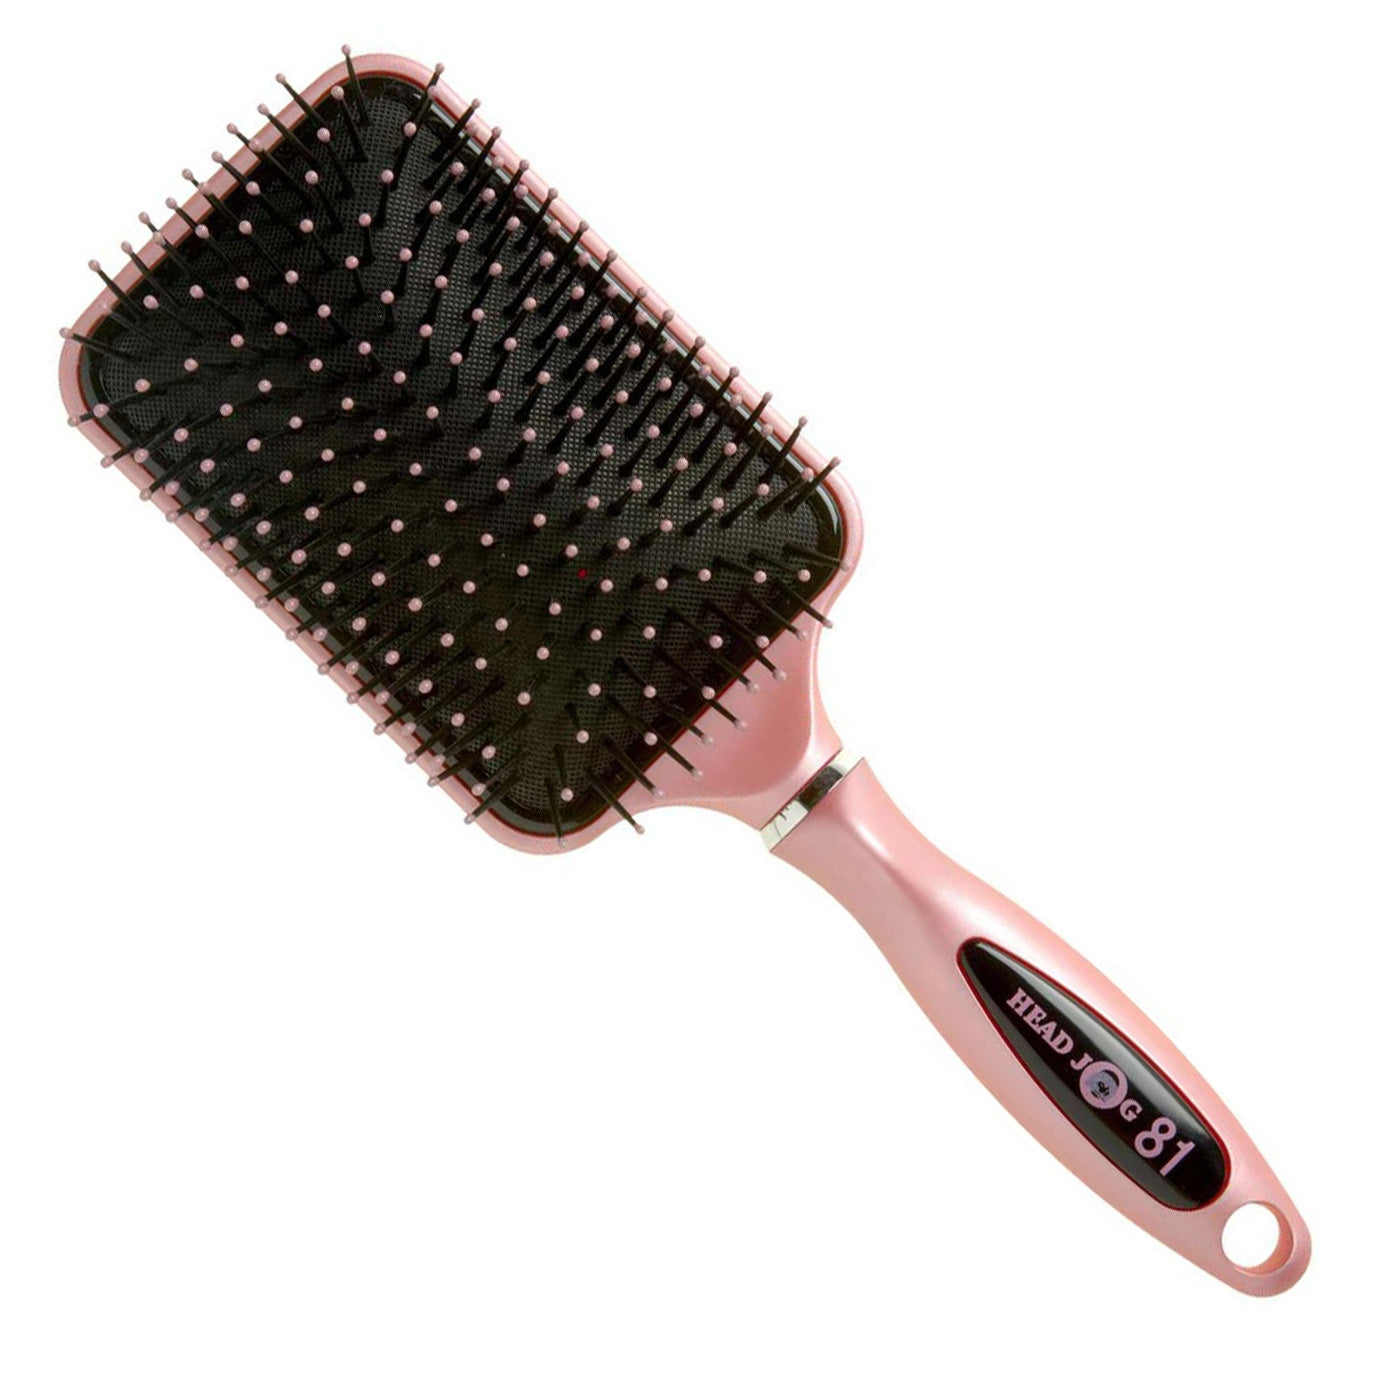 Head Jog Ceramic Ionic Pink 81 - Paddle Brush - Ultimate Hair and Beauty